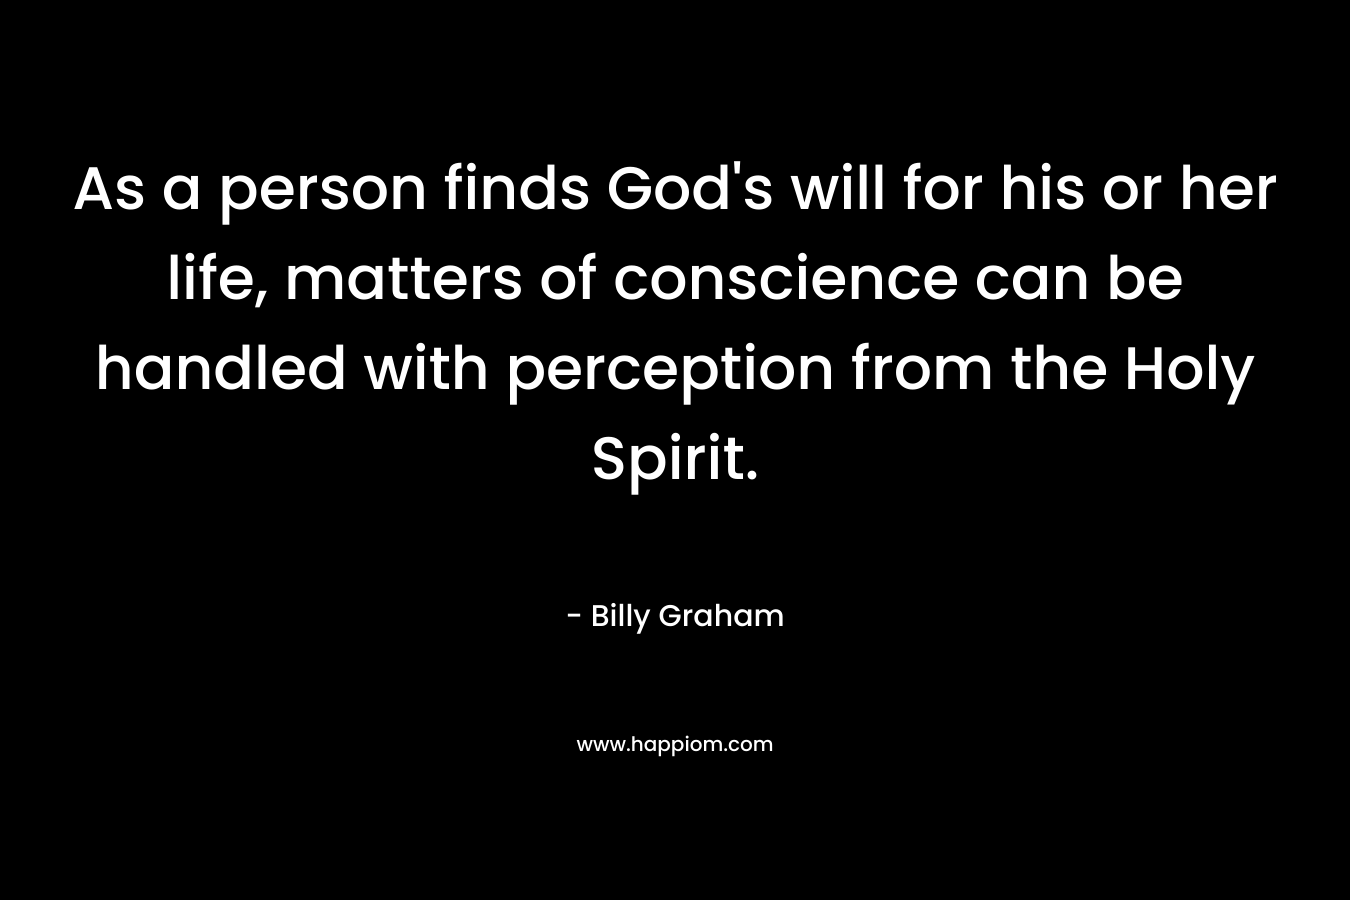 As a person finds God's will for his or her life, matters of conscience can be handled with perception from the Holy Spirit.